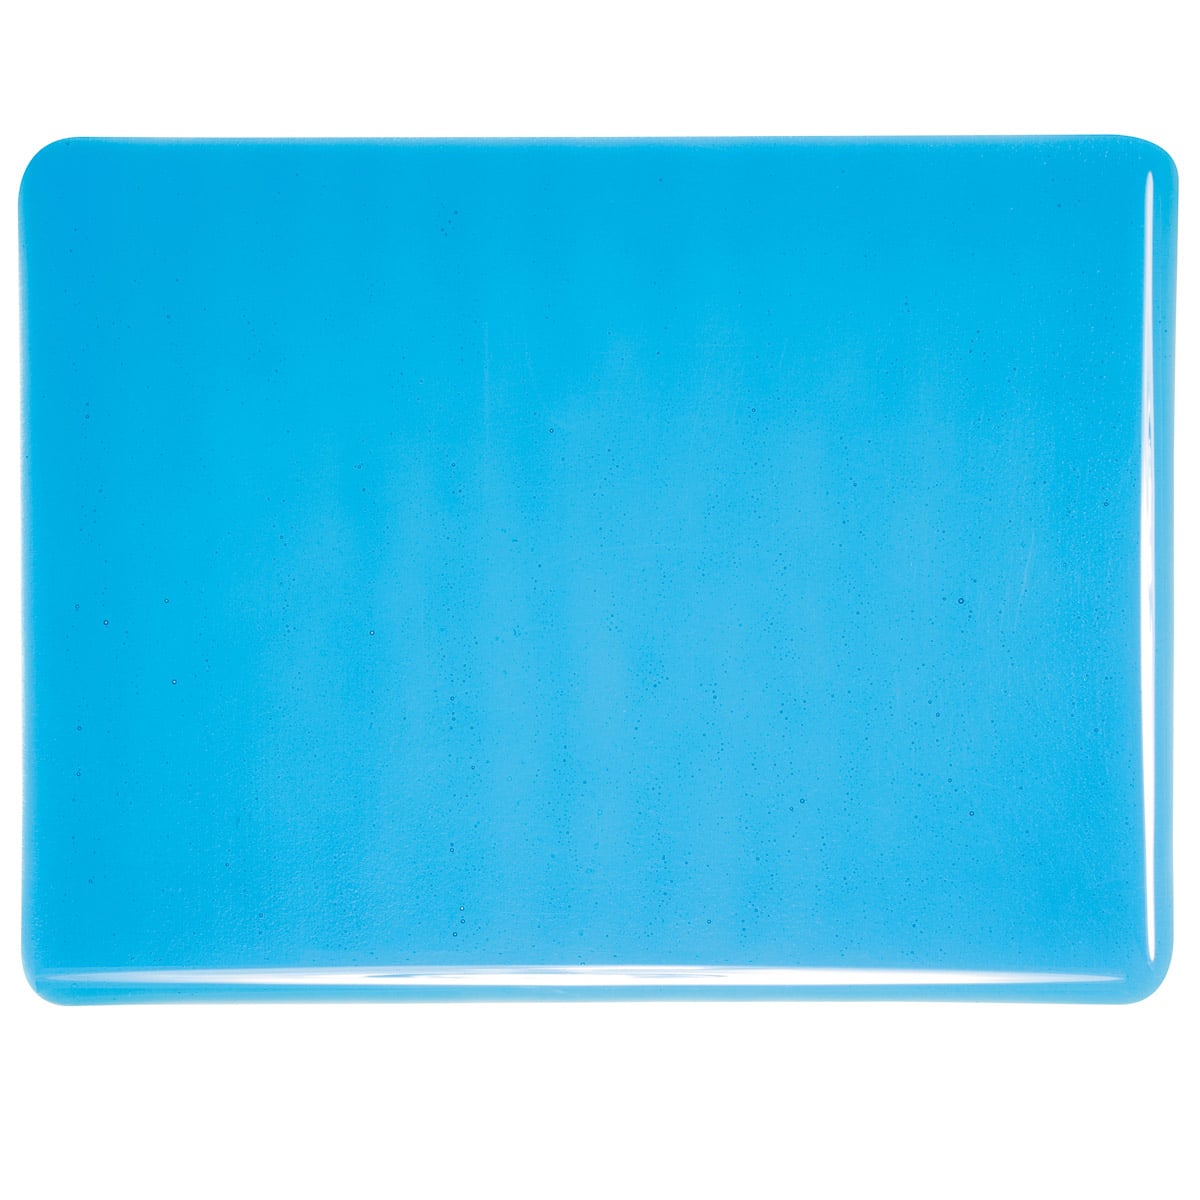 001116 Transparent Turquoise Blue sheet glass swatch